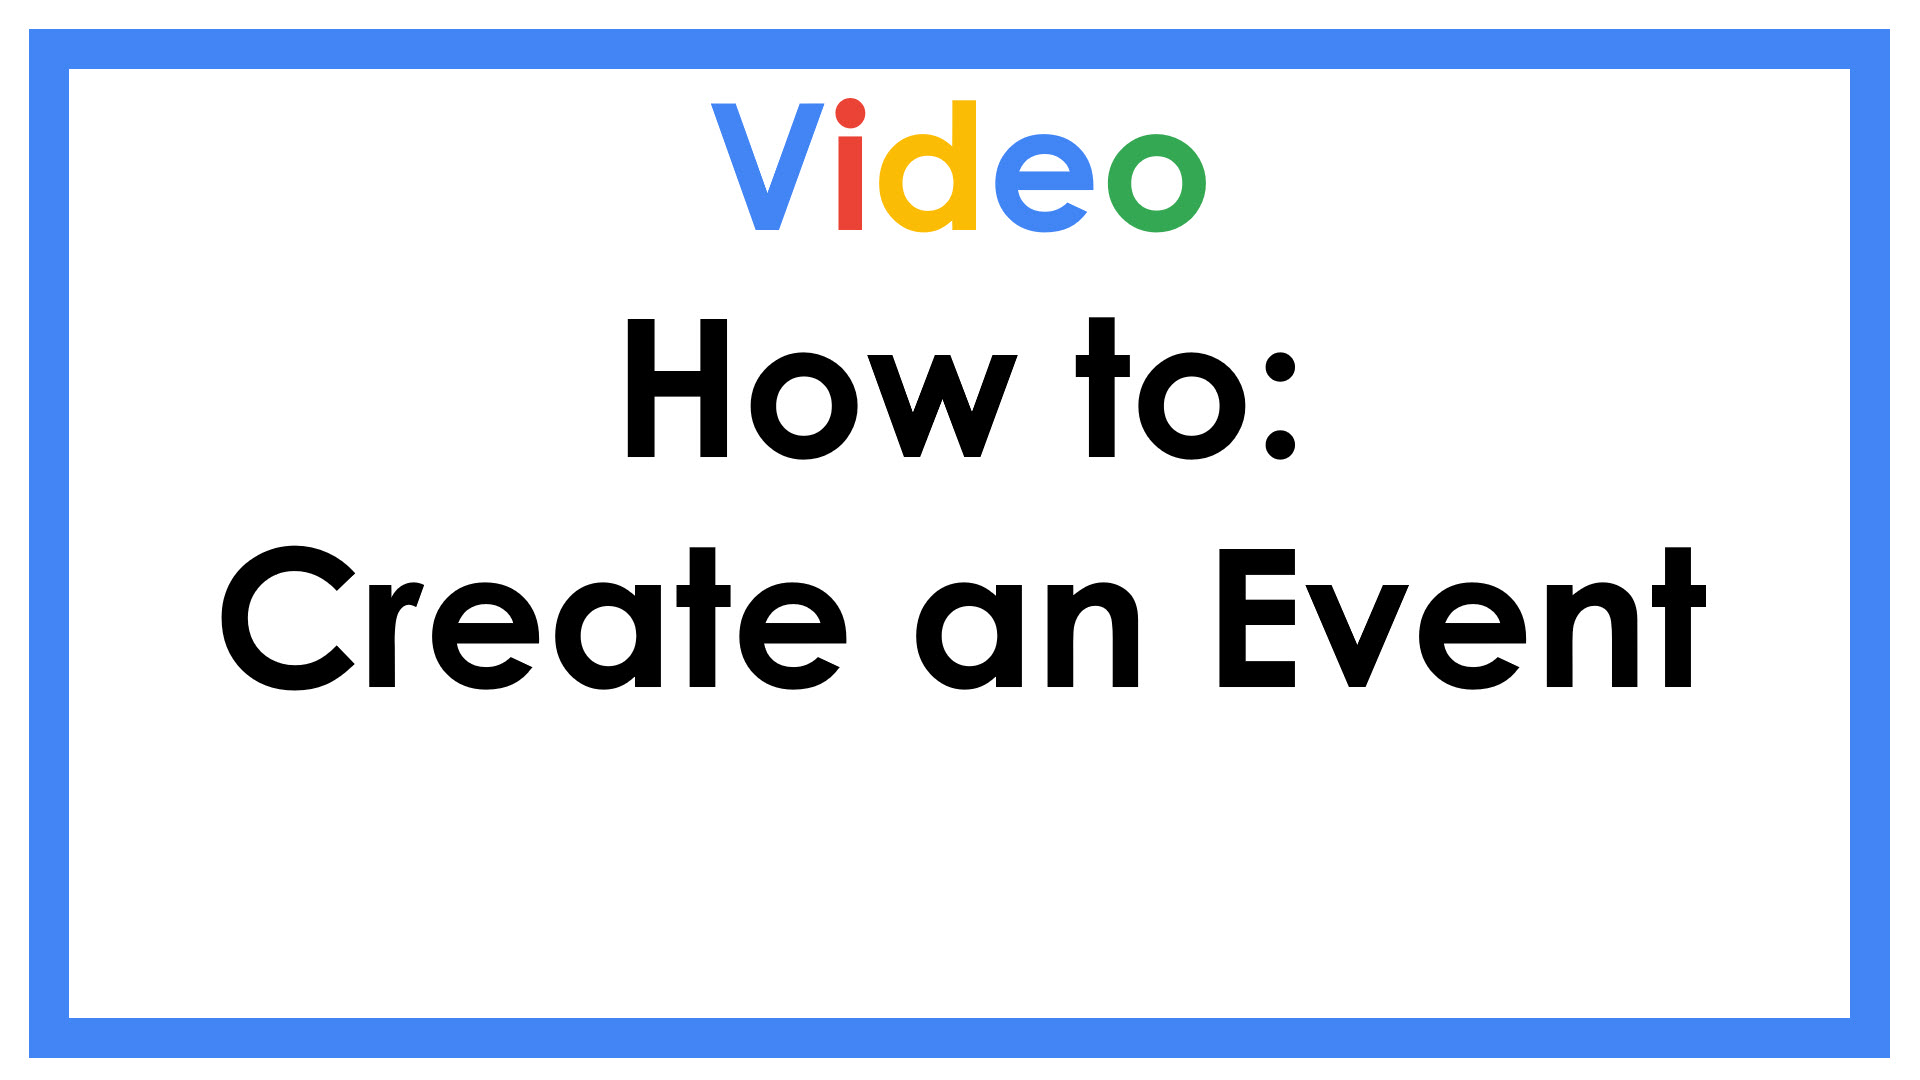 Video How To: Create an Event